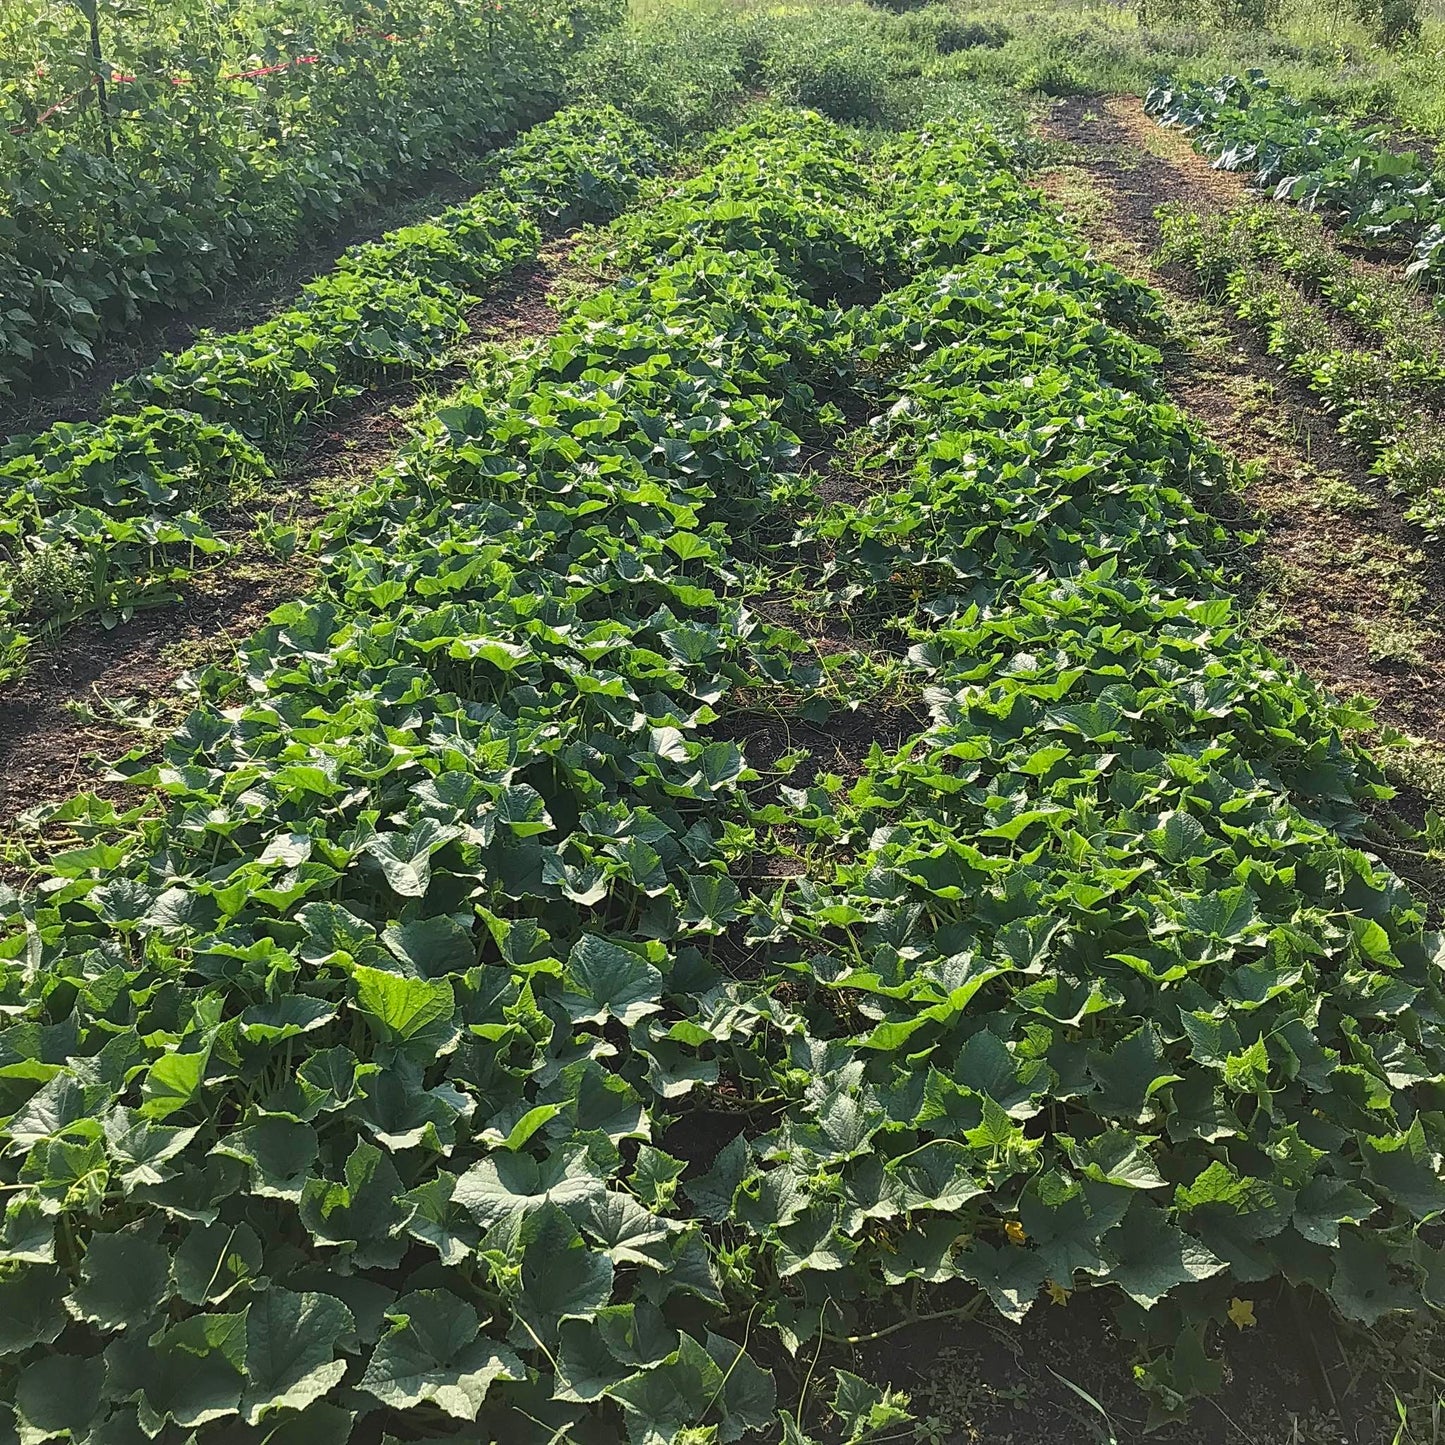 Three long beds of cucumber plants.